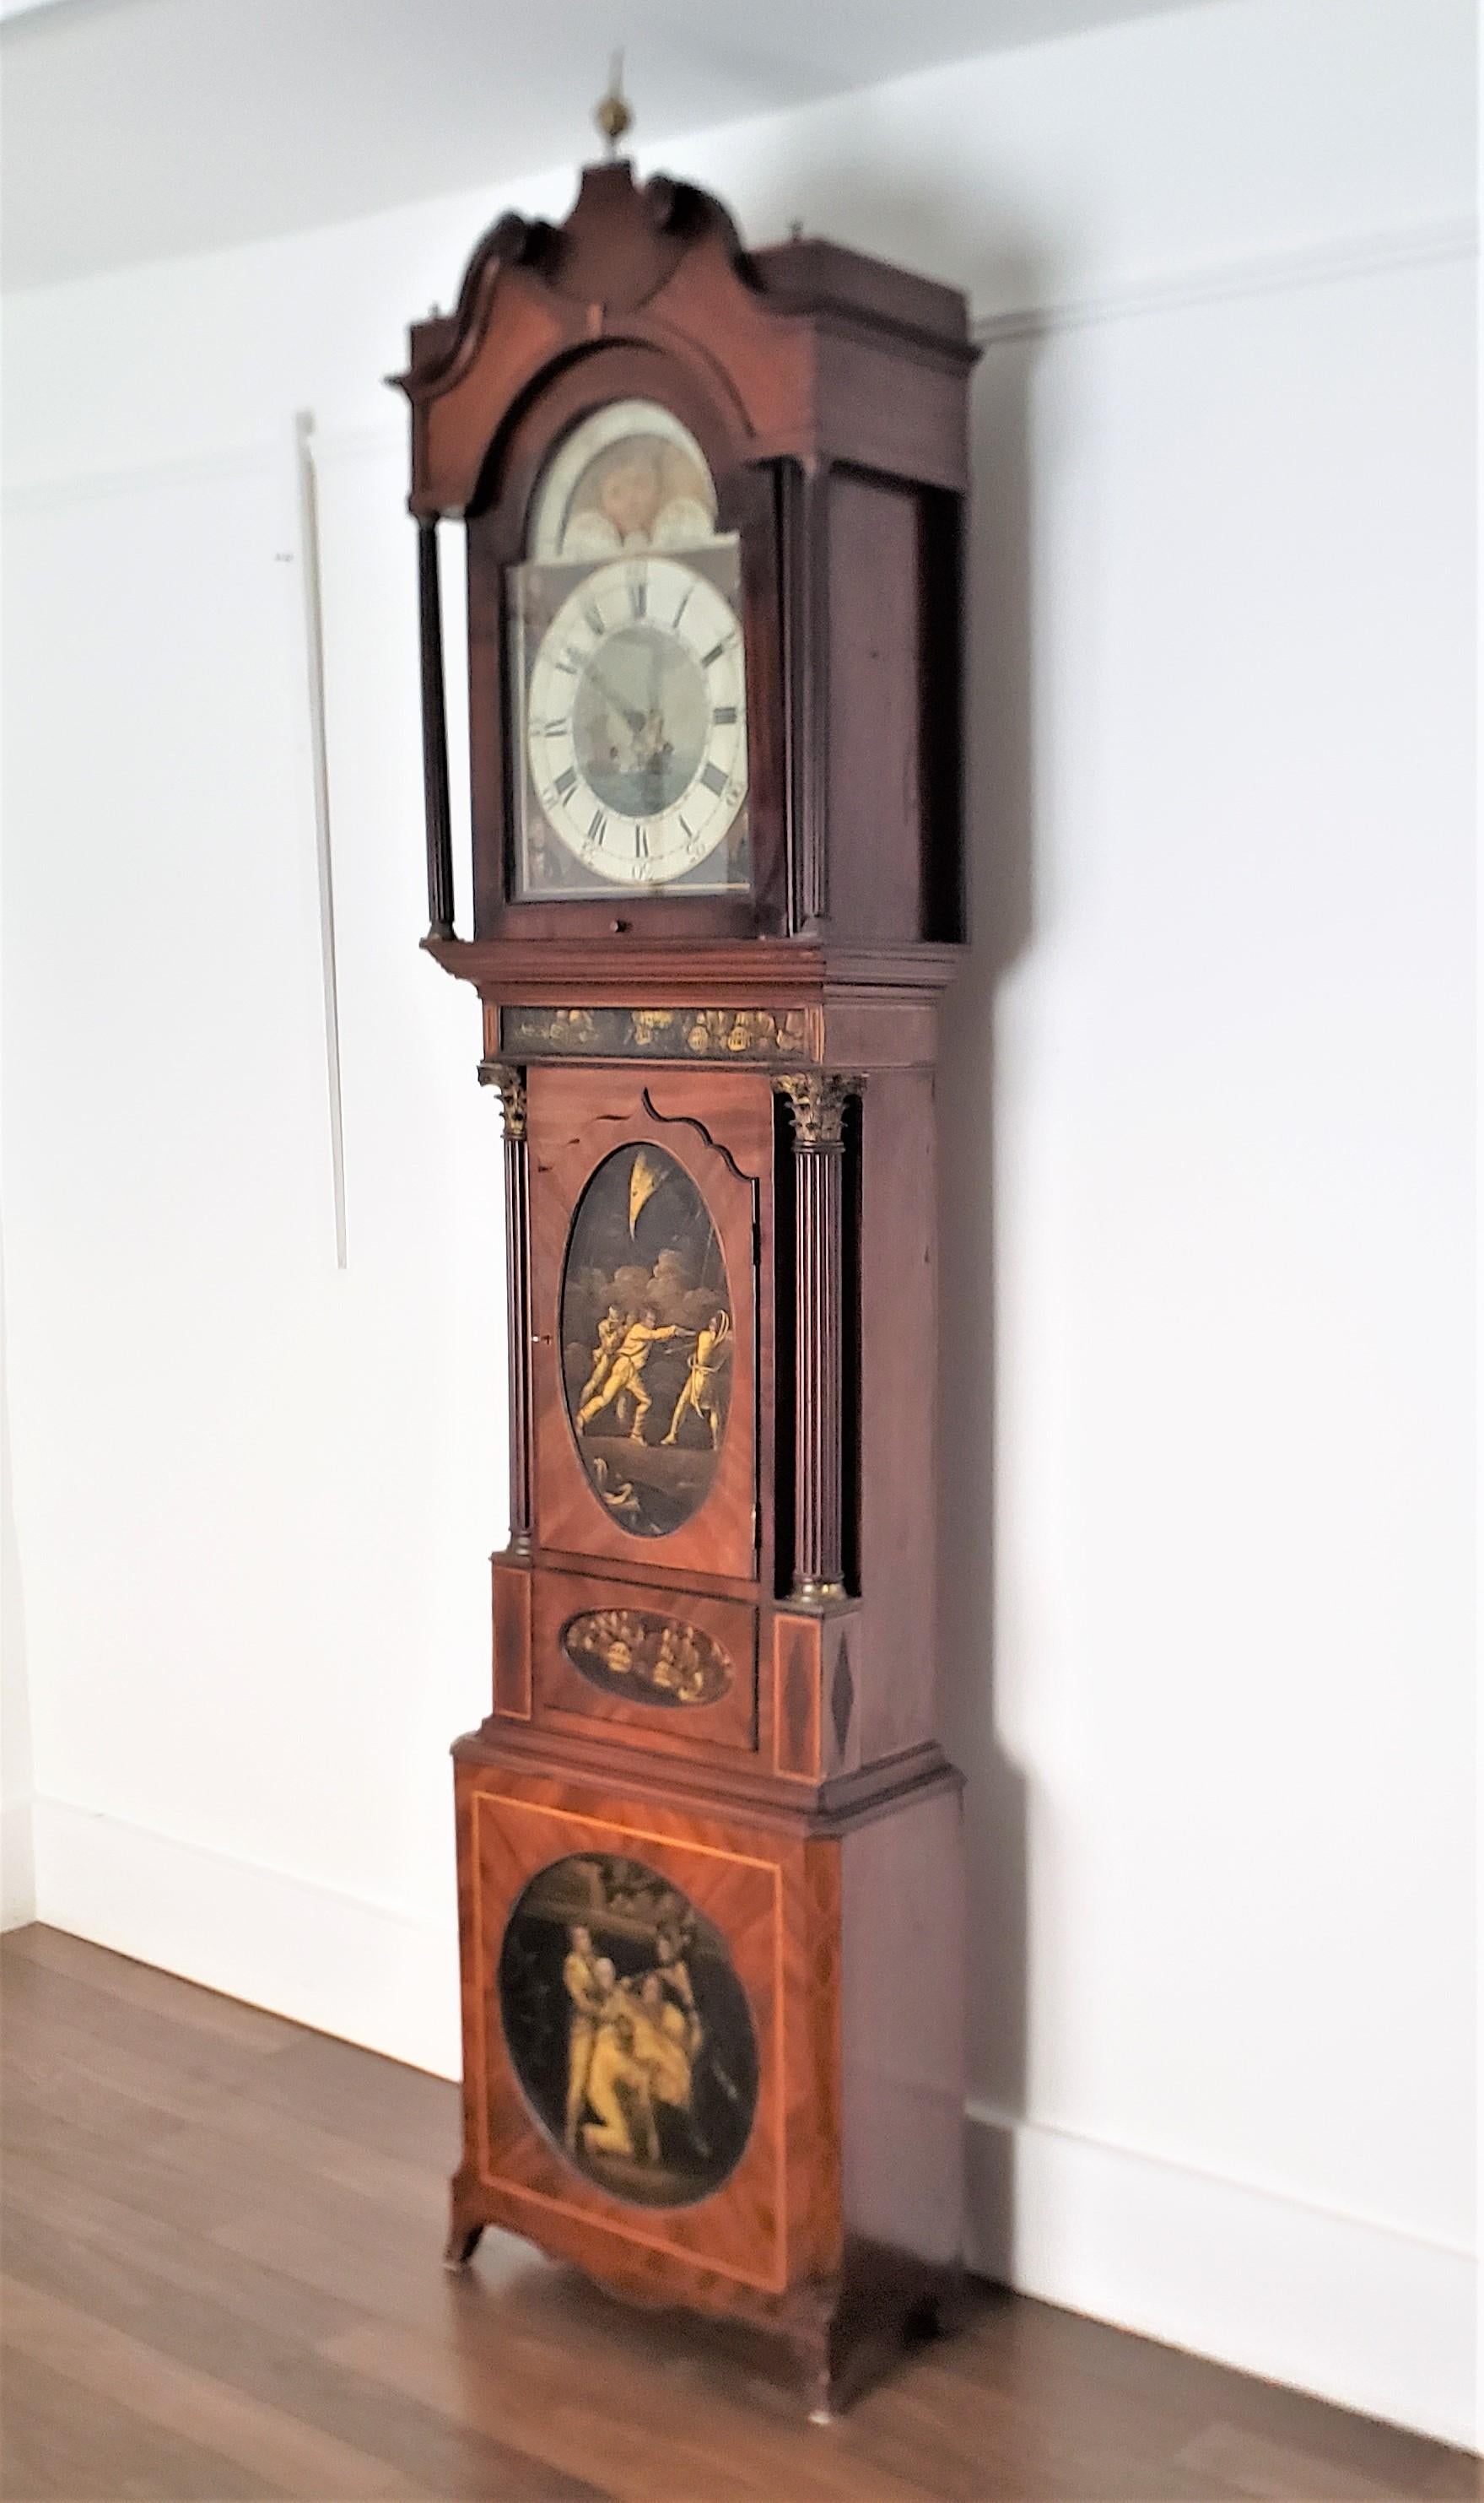 This very large and substantial antique grandfather clock was made in 1805 by William Whitaker of England with hand-painted artistry by Alker of Wigen to commemorate the life and death of Admiral Lord Nelson. The extremely well executed hand-painted